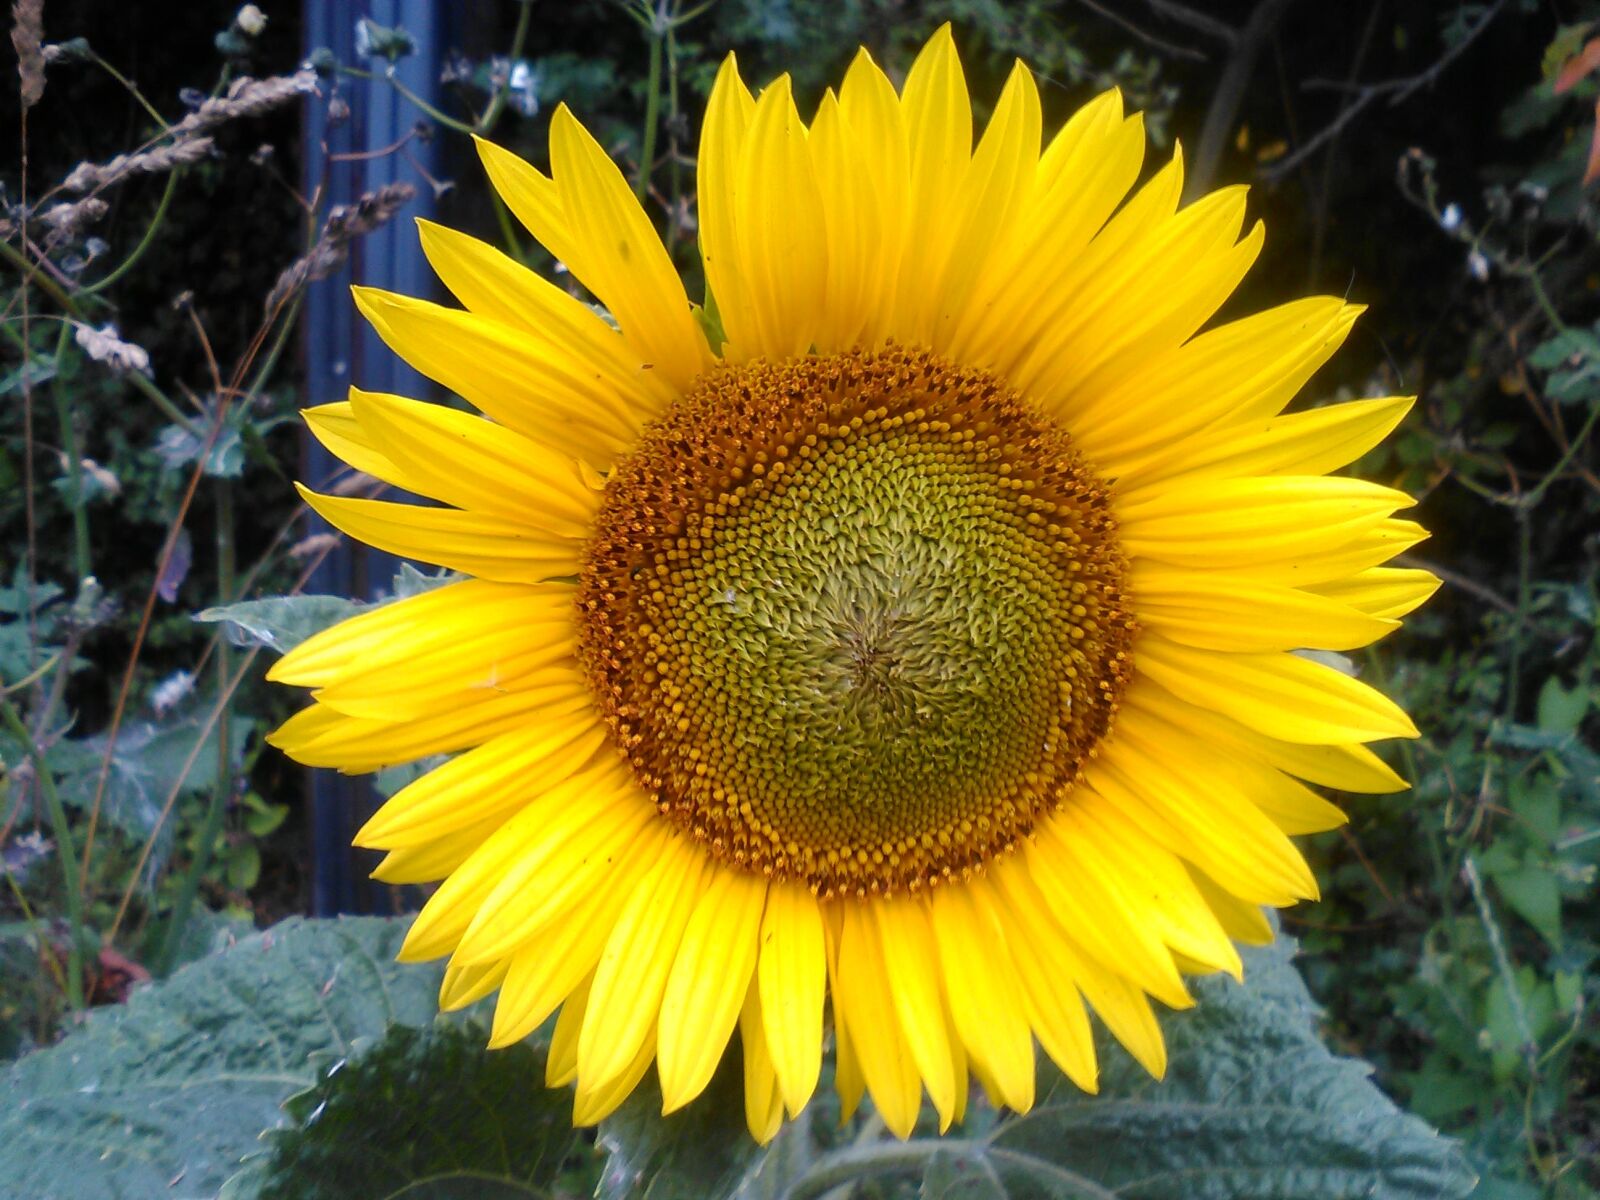 QCOM-AA QCAM-AA sample photo. Sunflower, flower, floral photography